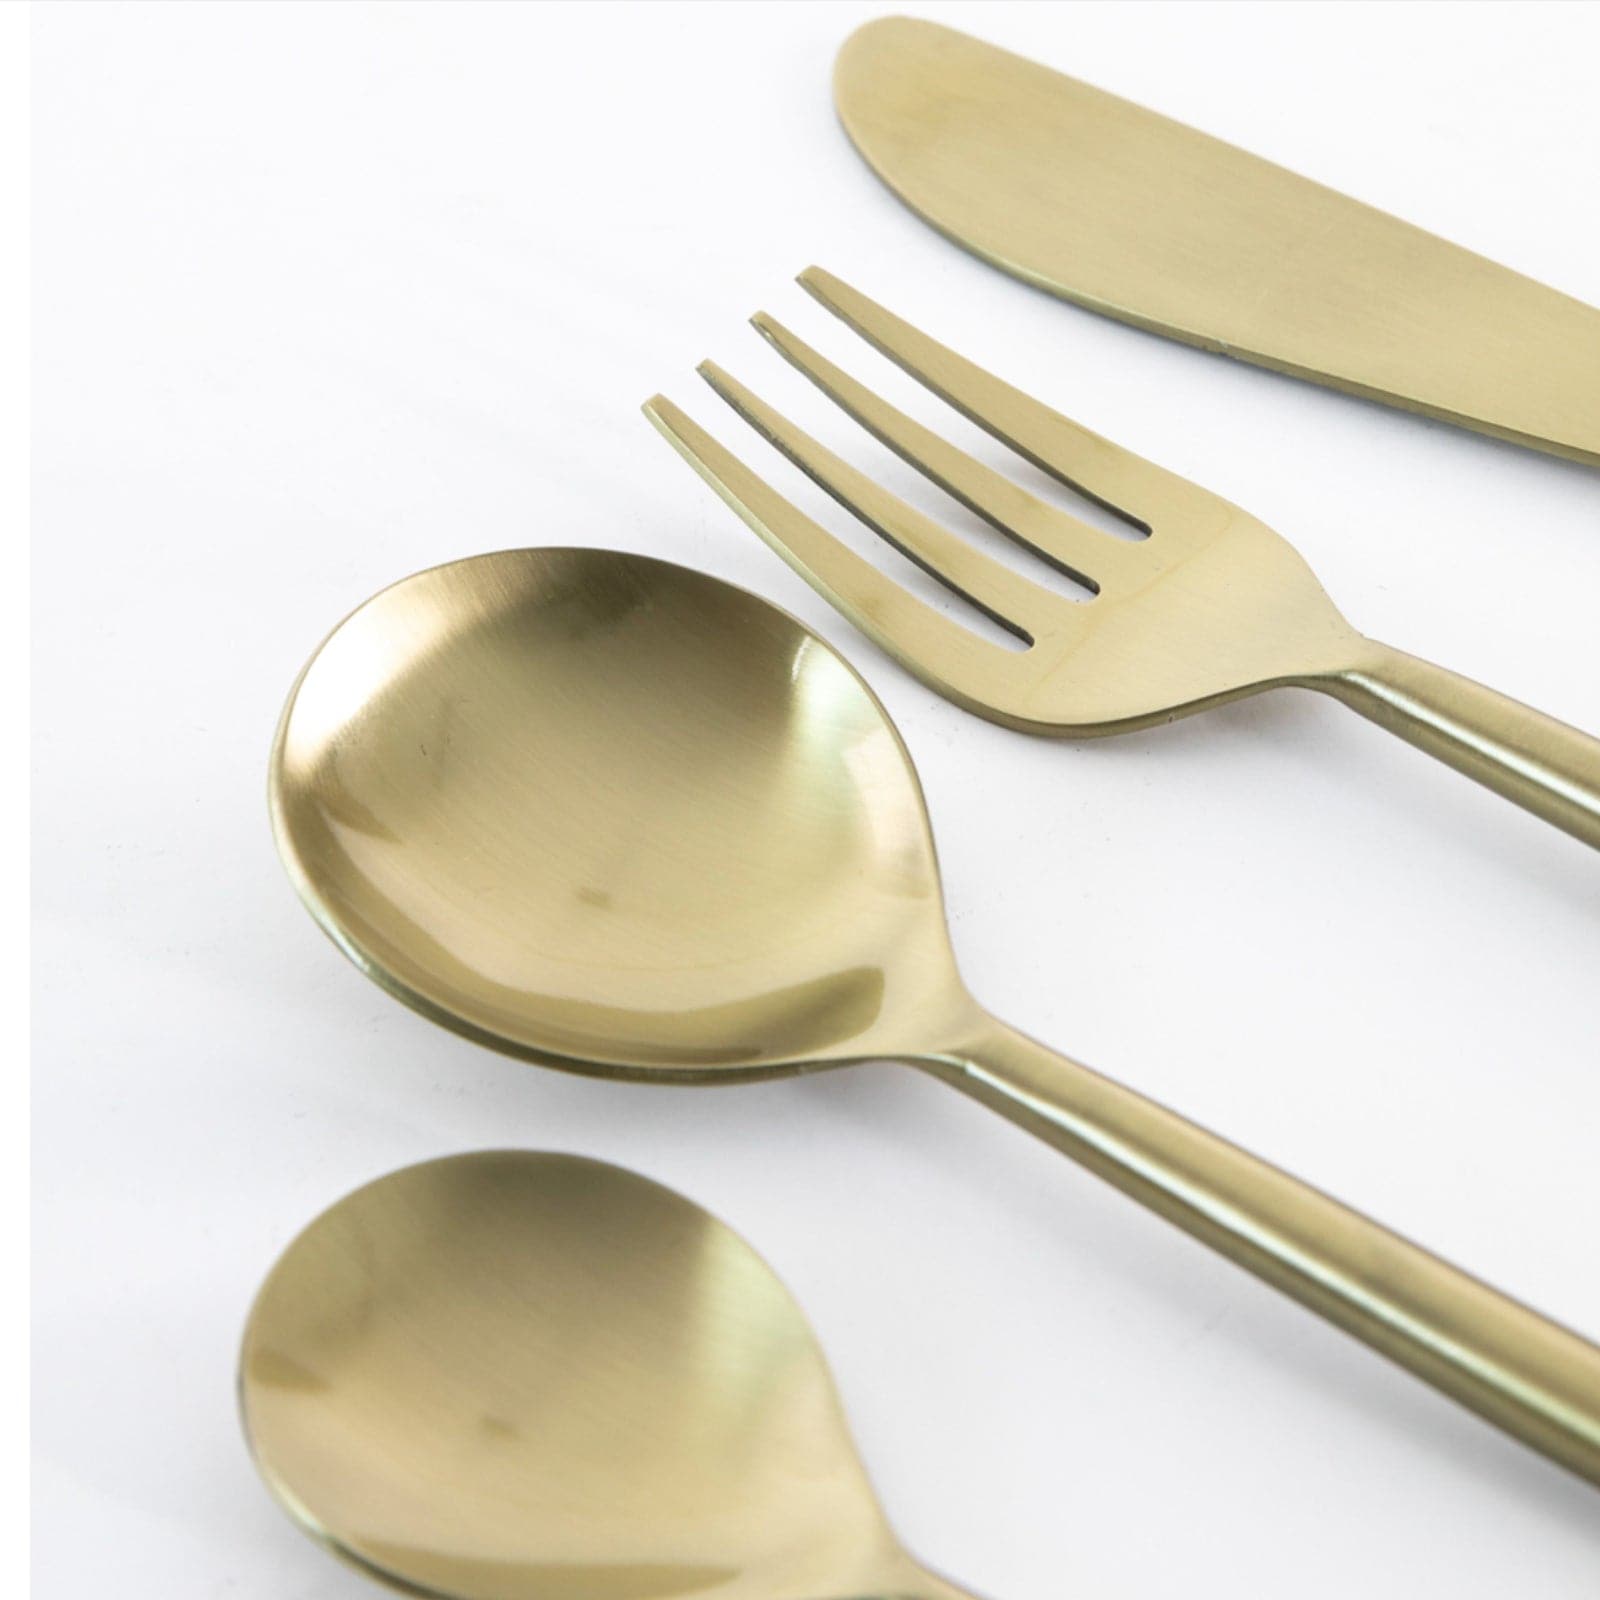 Gold Cutlery Set - 16 Piece - The Farthing